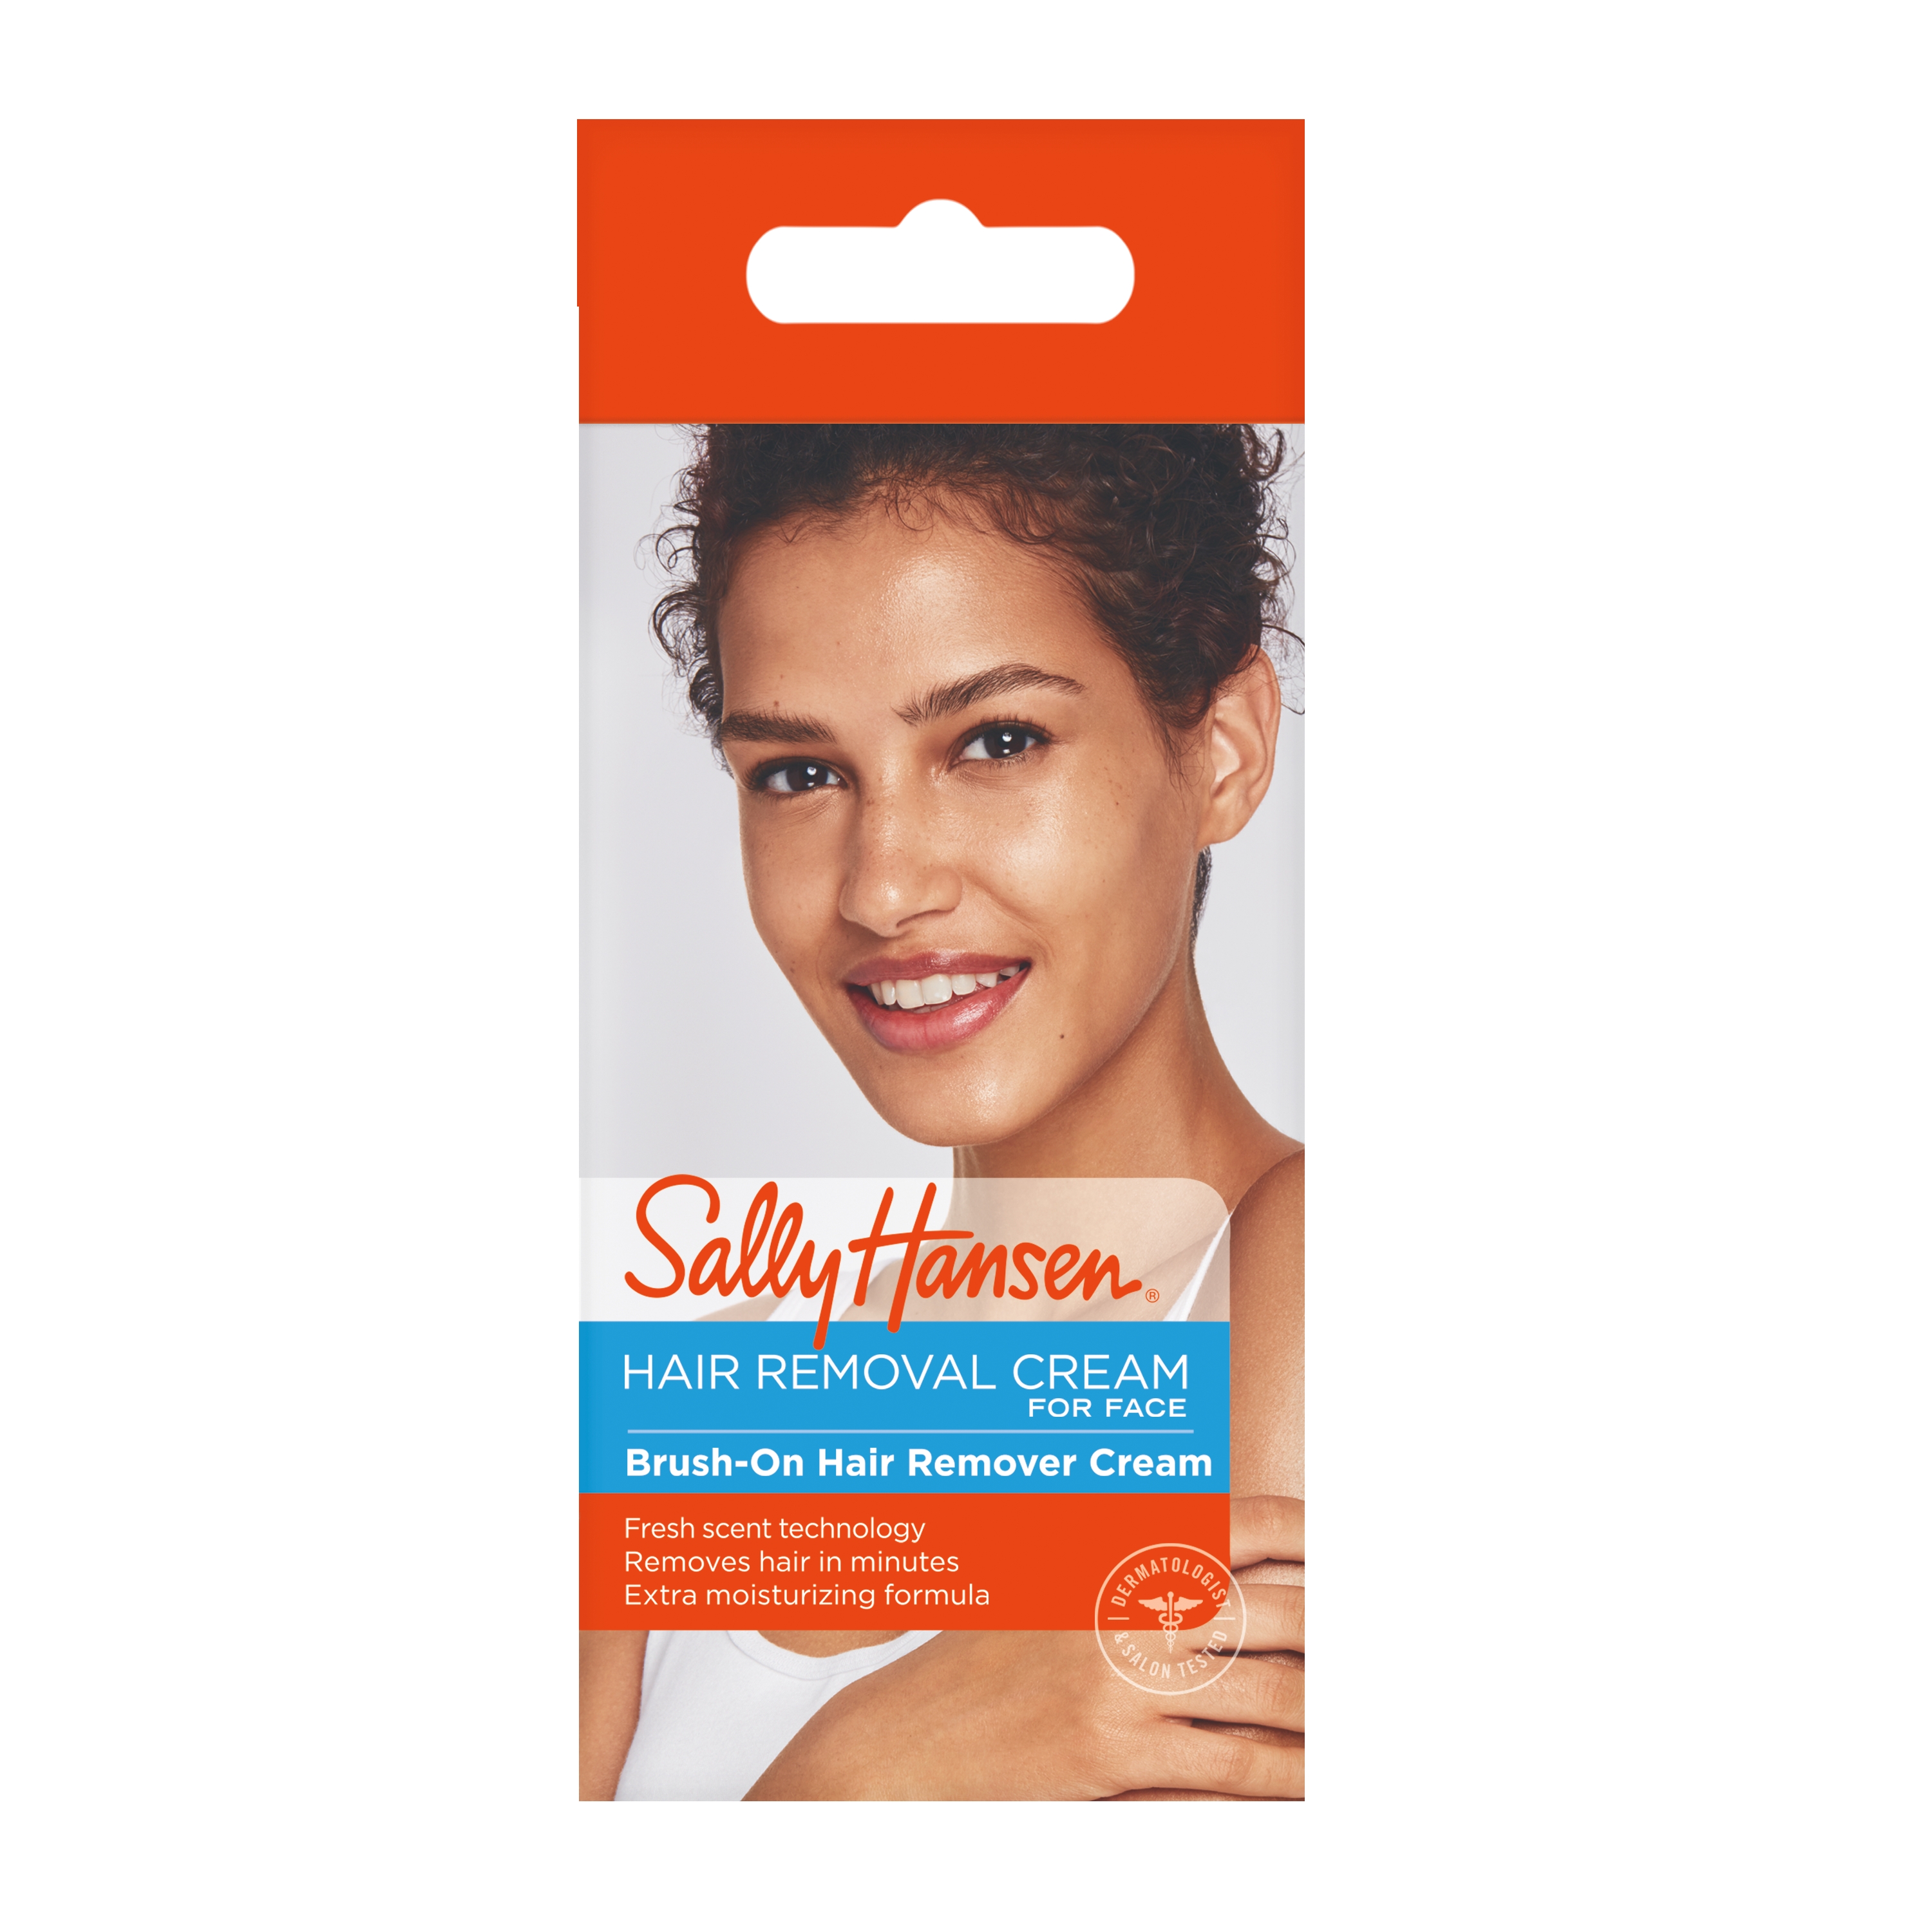 Sally Hansen Brush-On Hair Remover Creme for Face, 1.7 Oz. - image 4 of 4